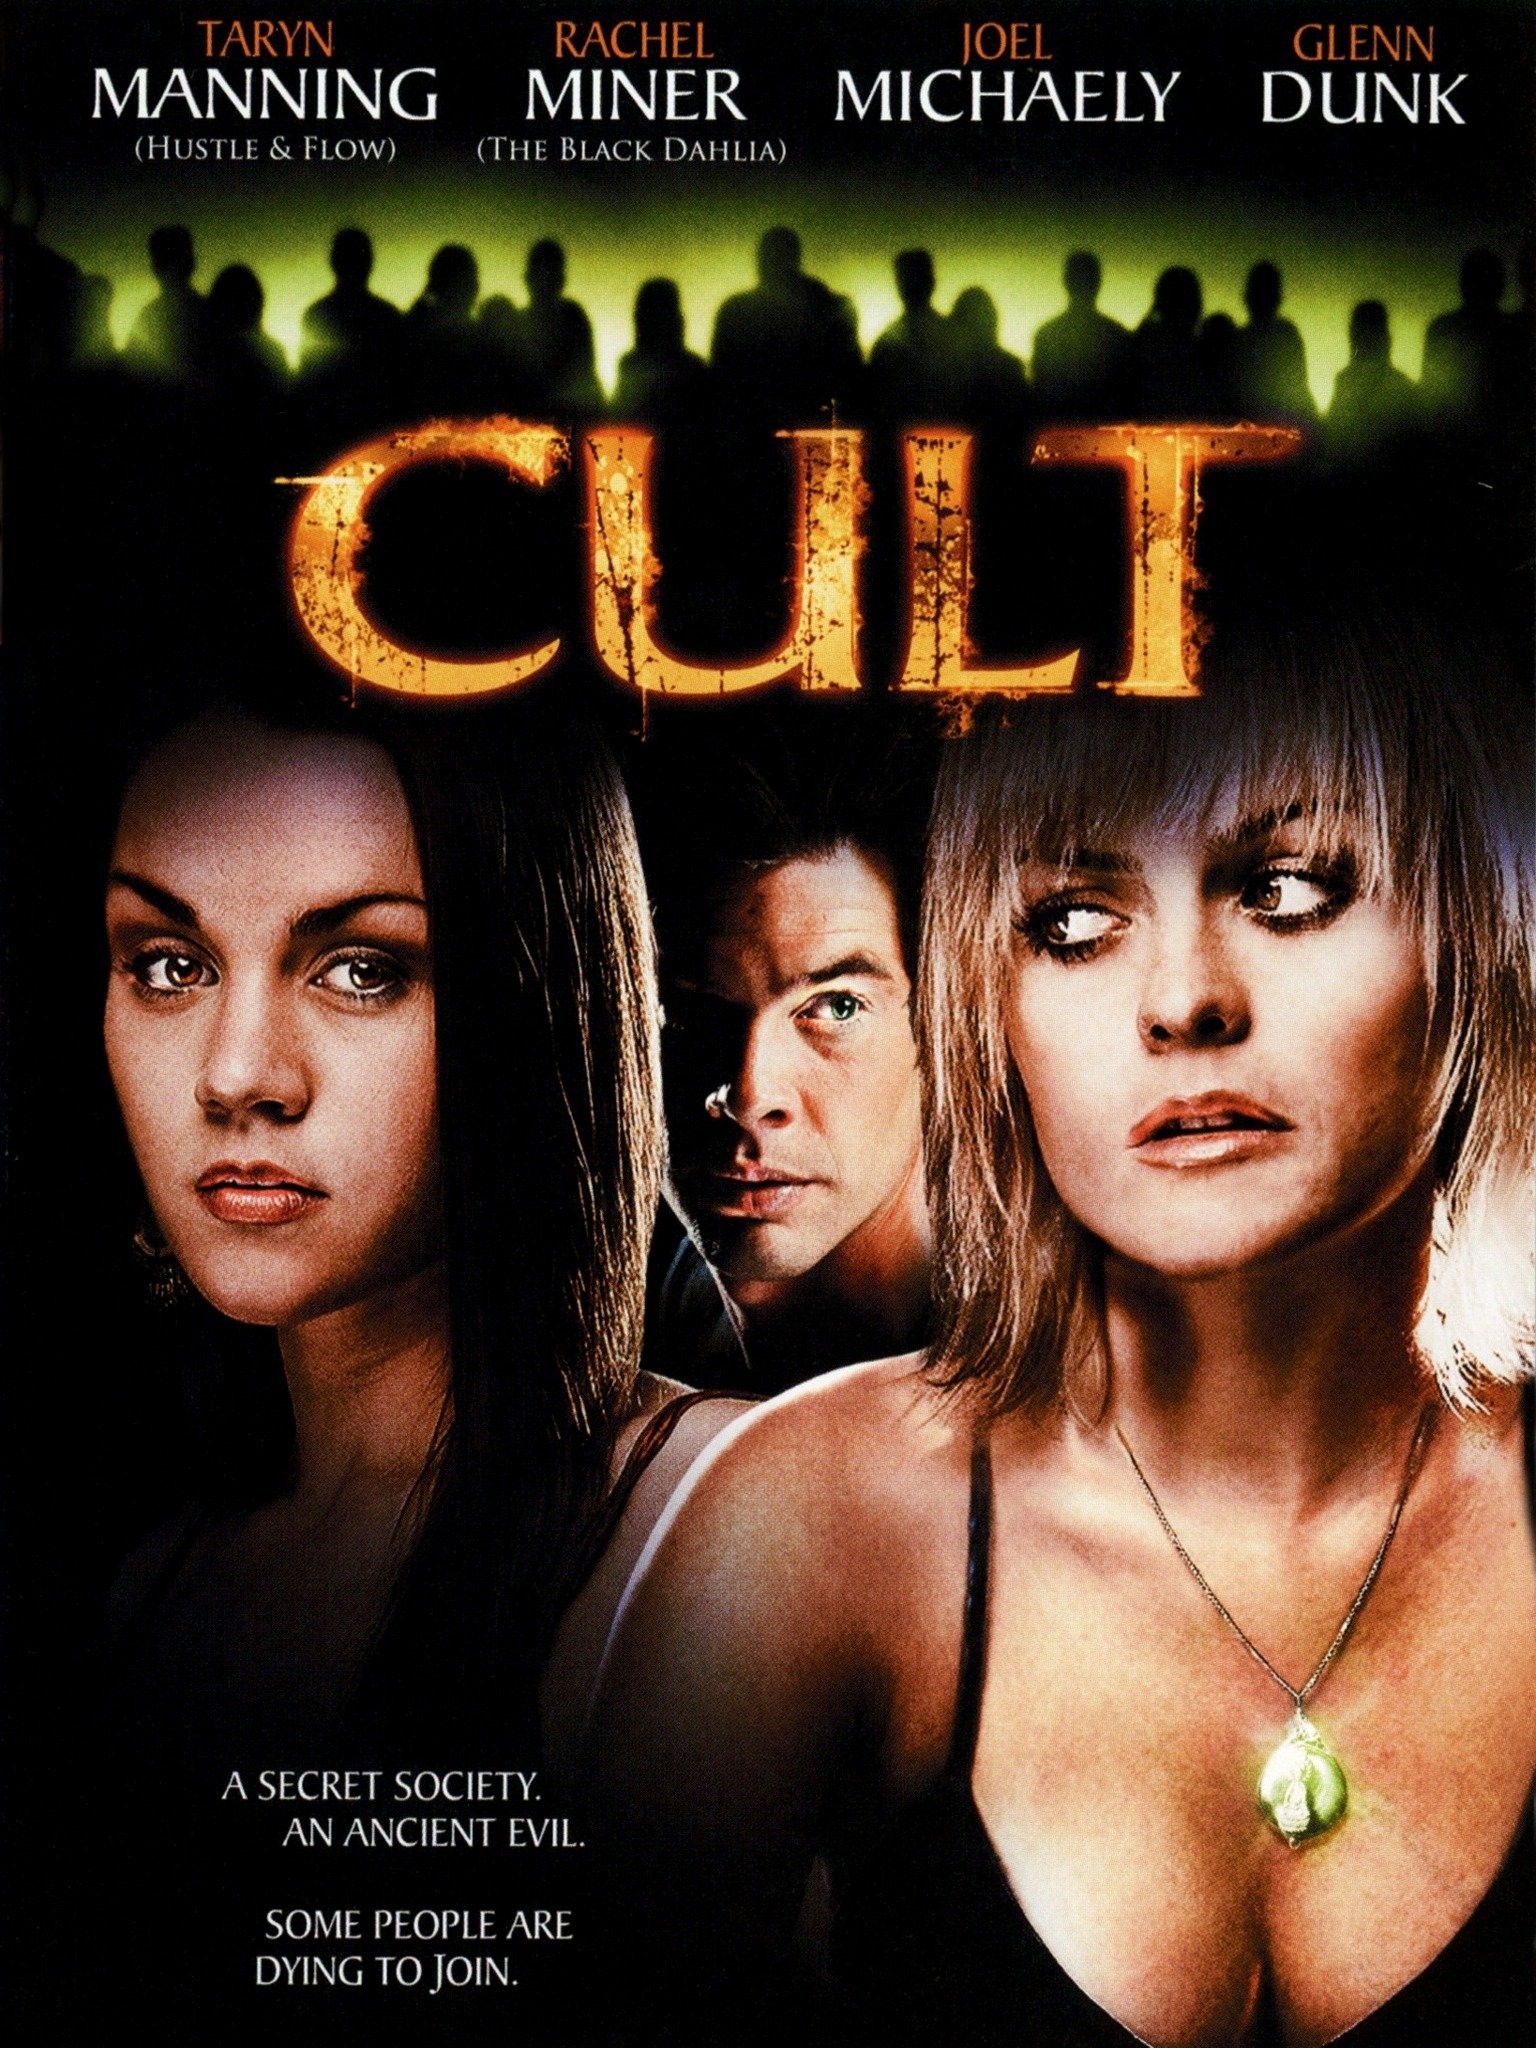 x-rated cult films